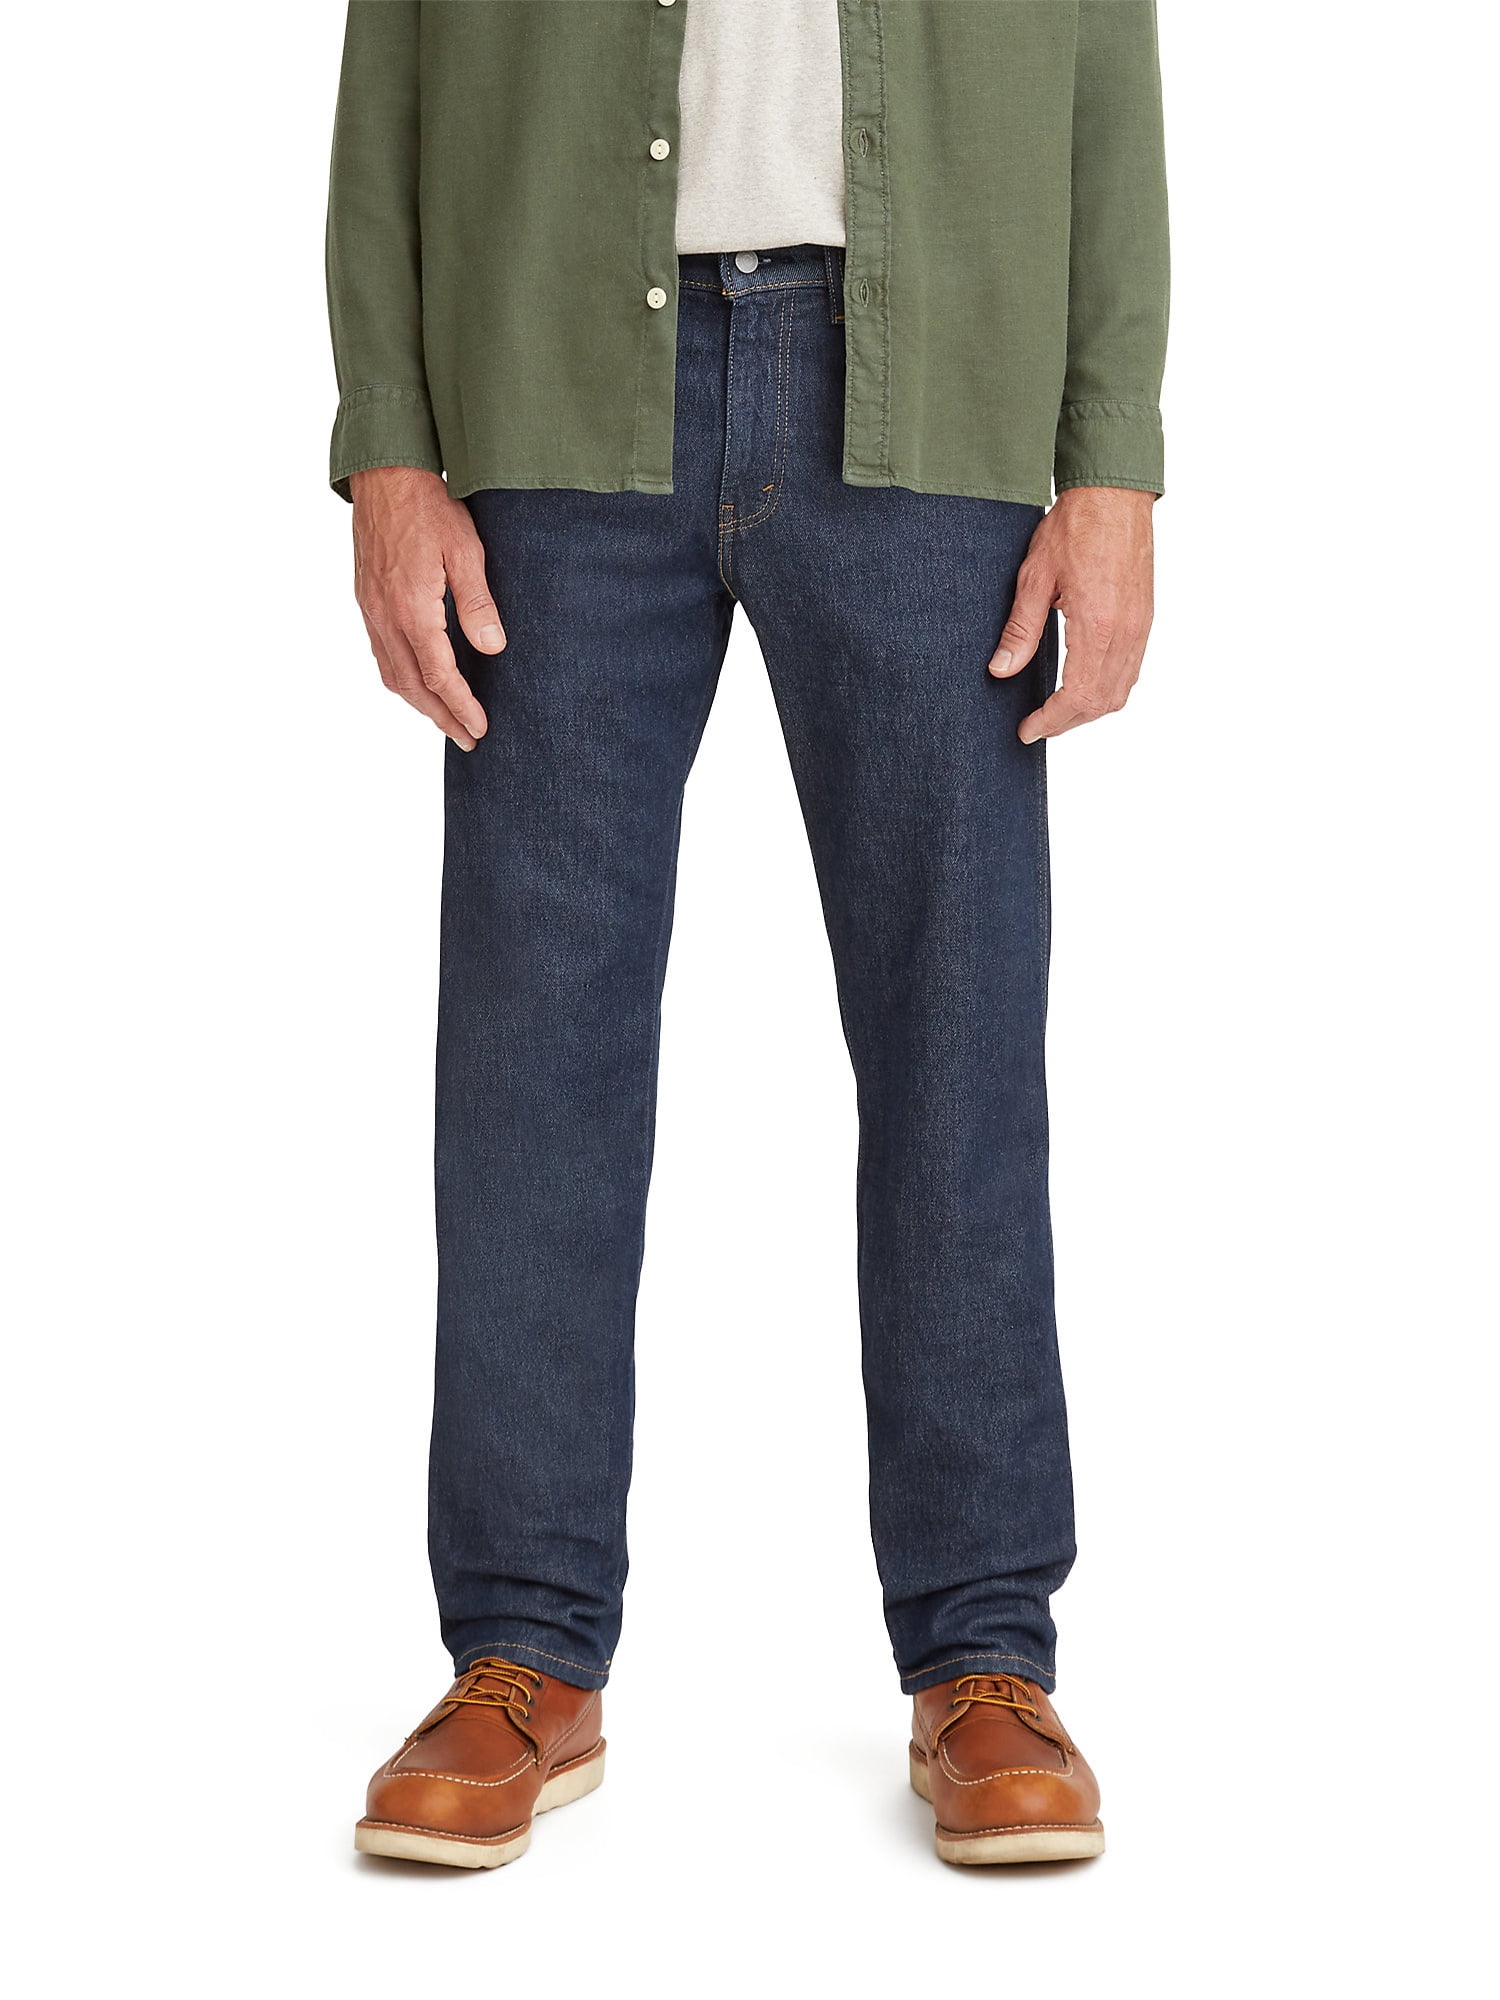 Levi's Men's Relaxed Western Fit Jeans 